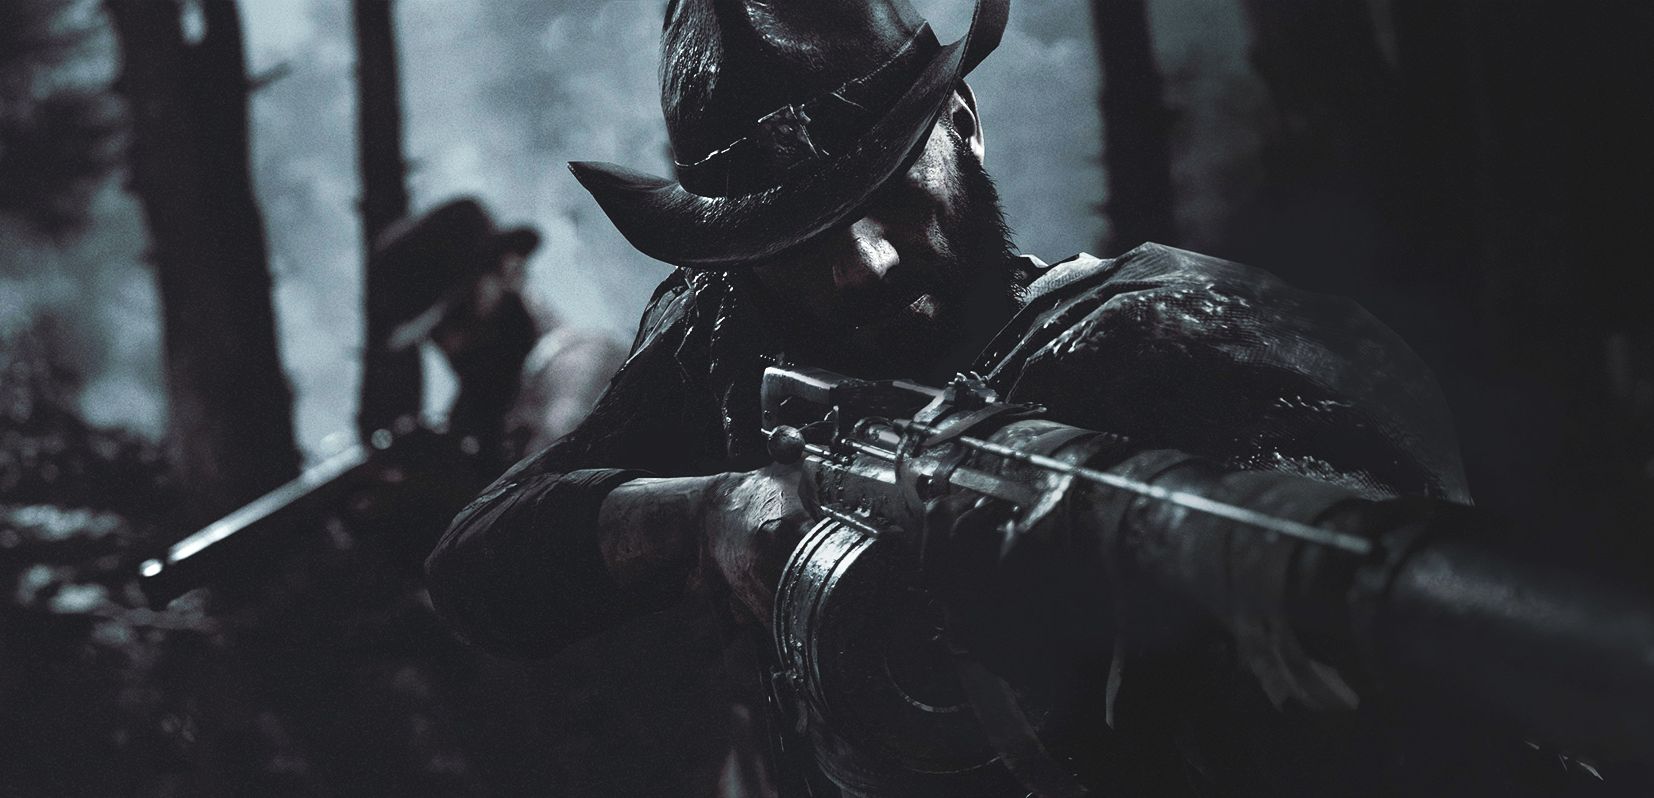 Hunt: Showdown video explains exactly what you do in the game | VG247